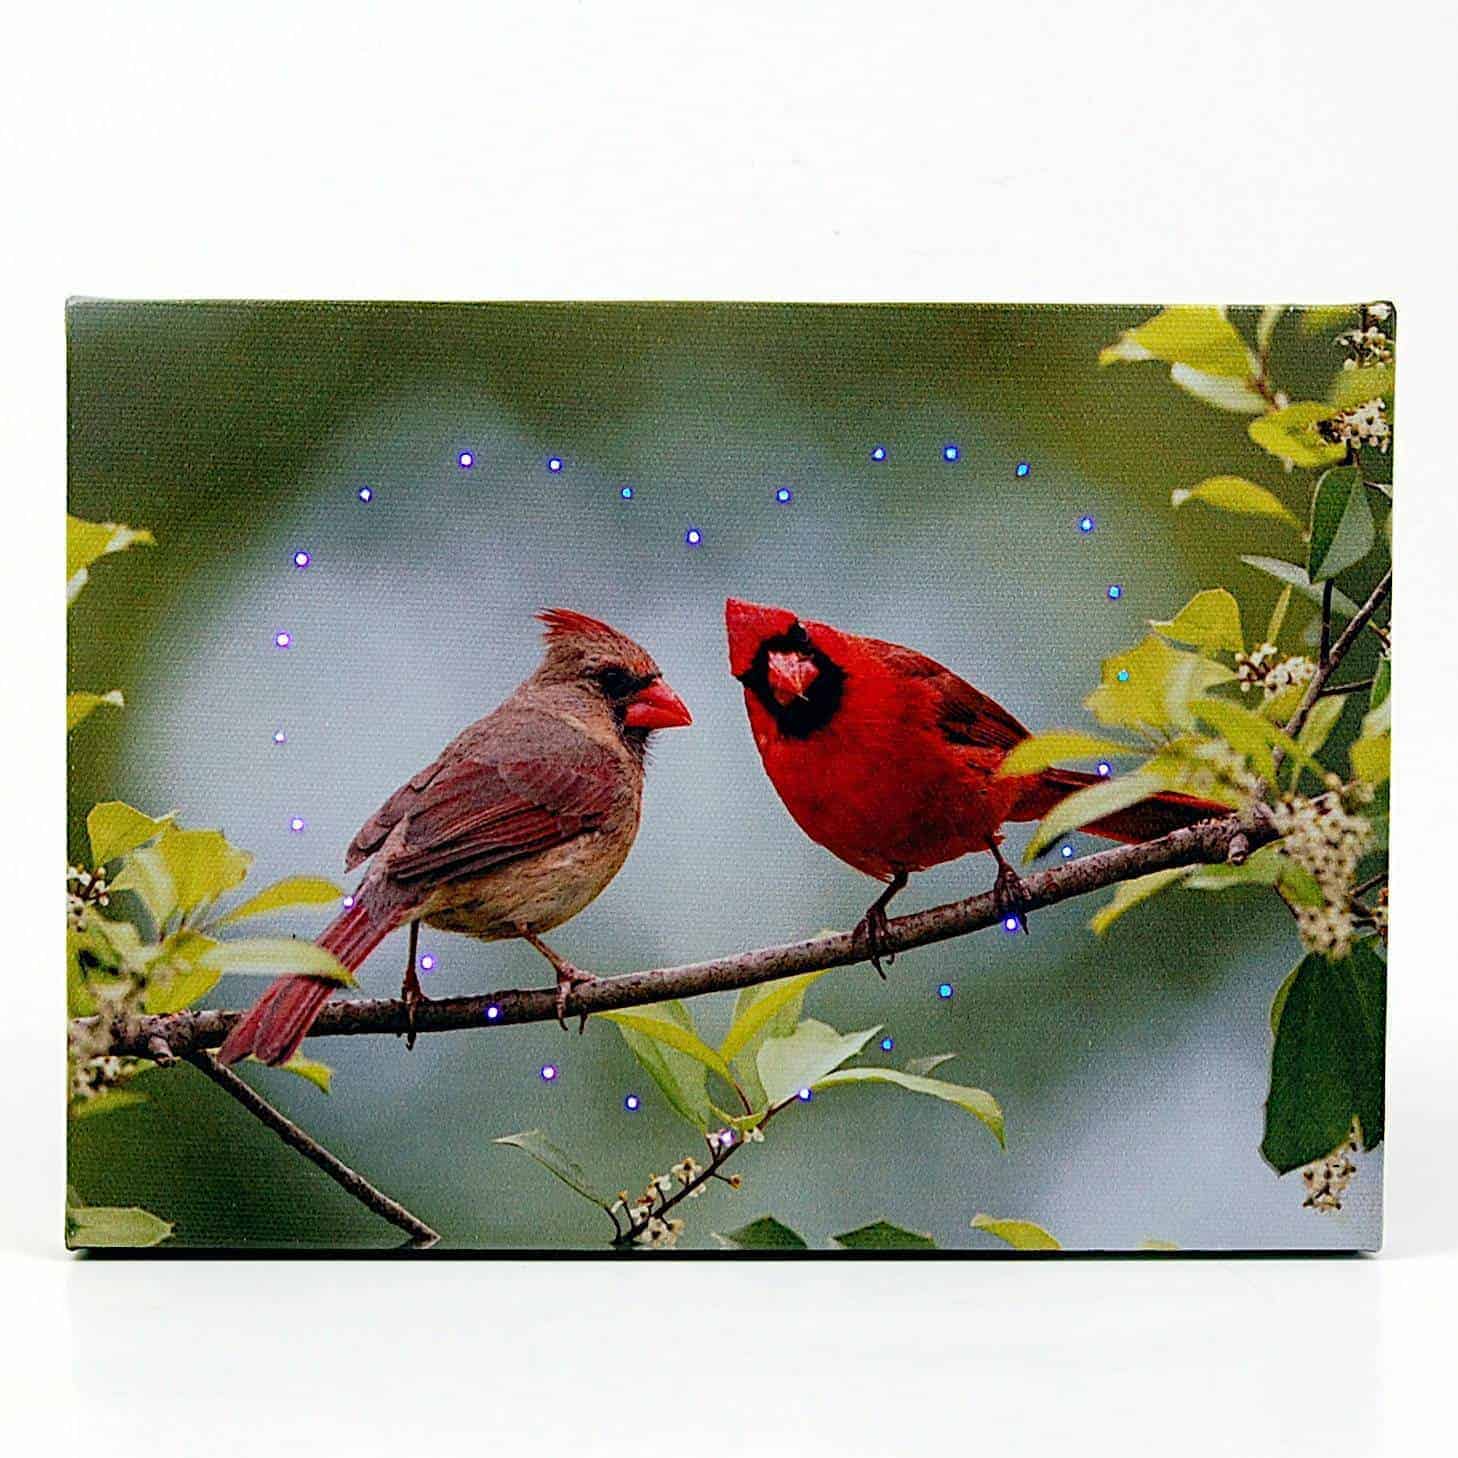 This Cardinal Love Birds LED Light Up Lighted Canvas Wall or Tabletop Picture Art is made with love by Premier Homegoods! Shop more unique gift ideas today with Spots Initiatives, the best way to support creators.